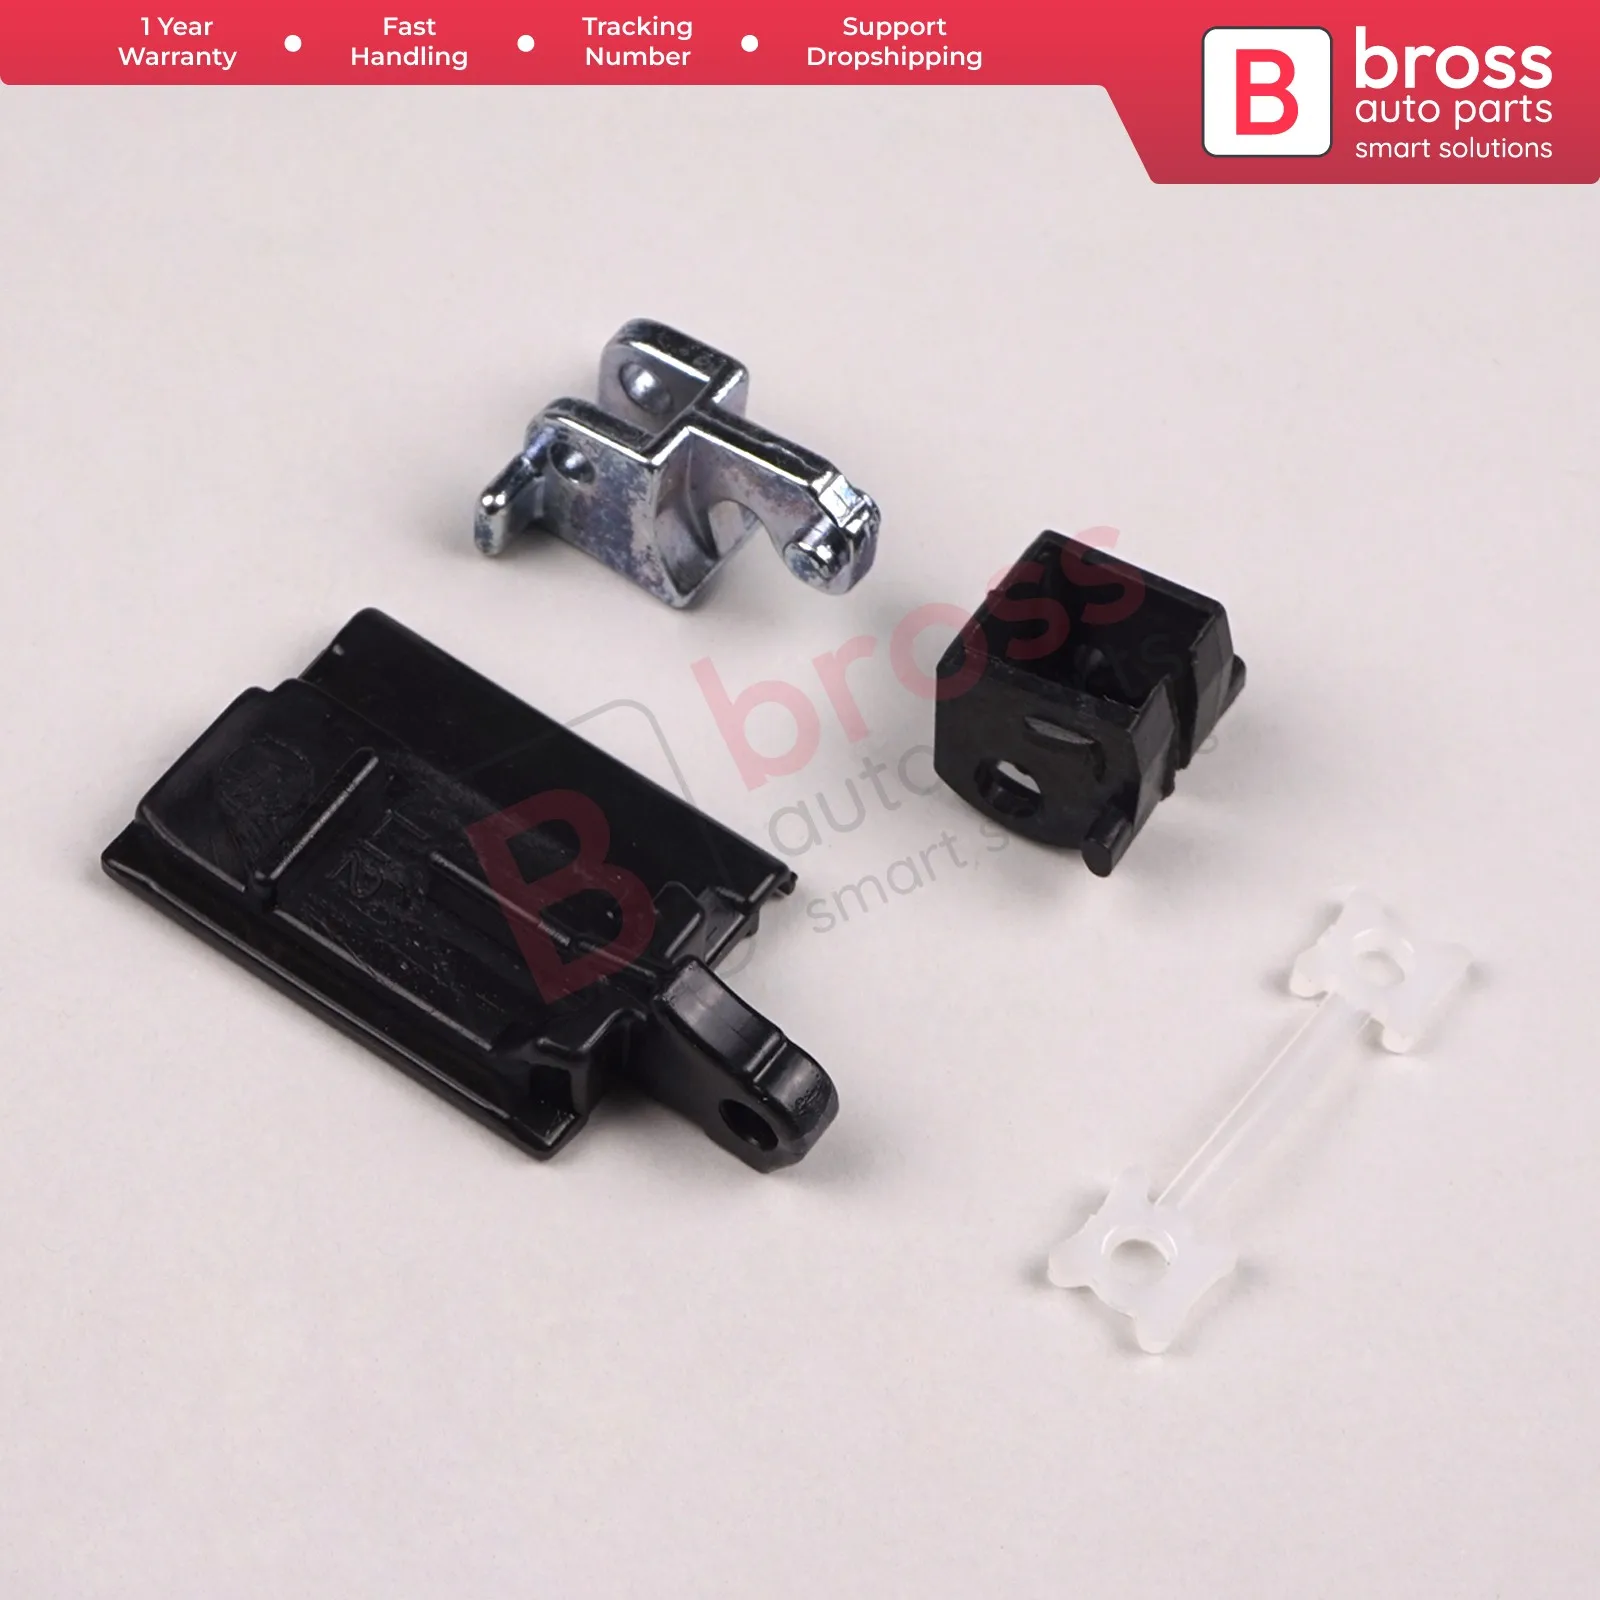 

Bross Auto Parts BSR532 4 Pieces Sunroof Slider Guide Rail Set Left Side for BMW 3 Series E36 1992-1999 Ship from Turkey